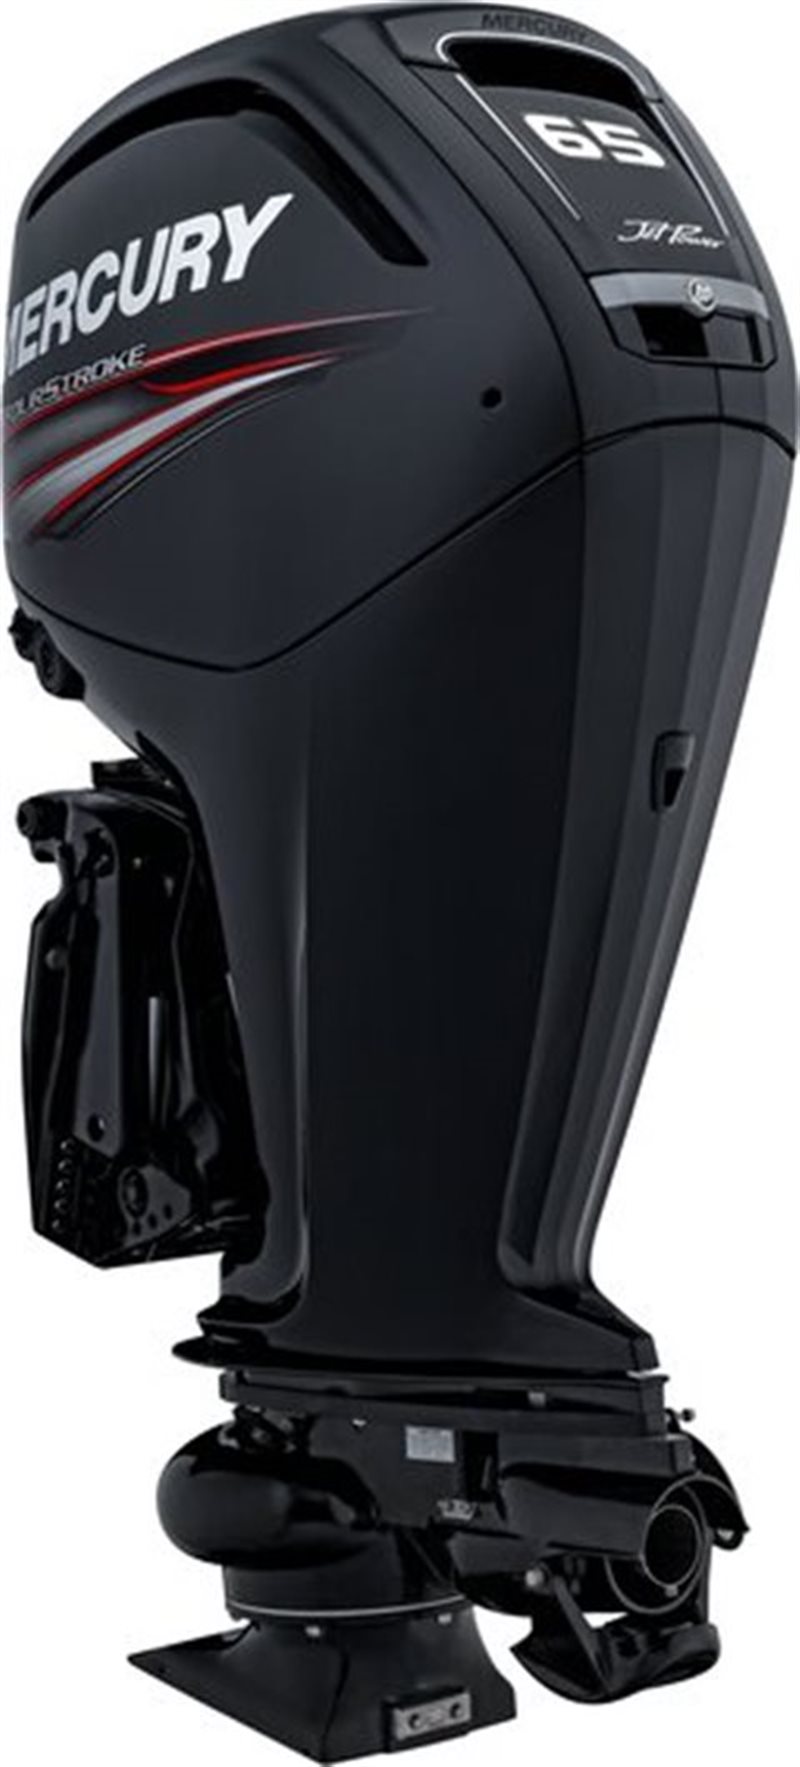 2021 Mercury Outboard FourStroke Jet Outboards 25-80 hp 65 hp Jet FourStroke at DT Powersports & Marine